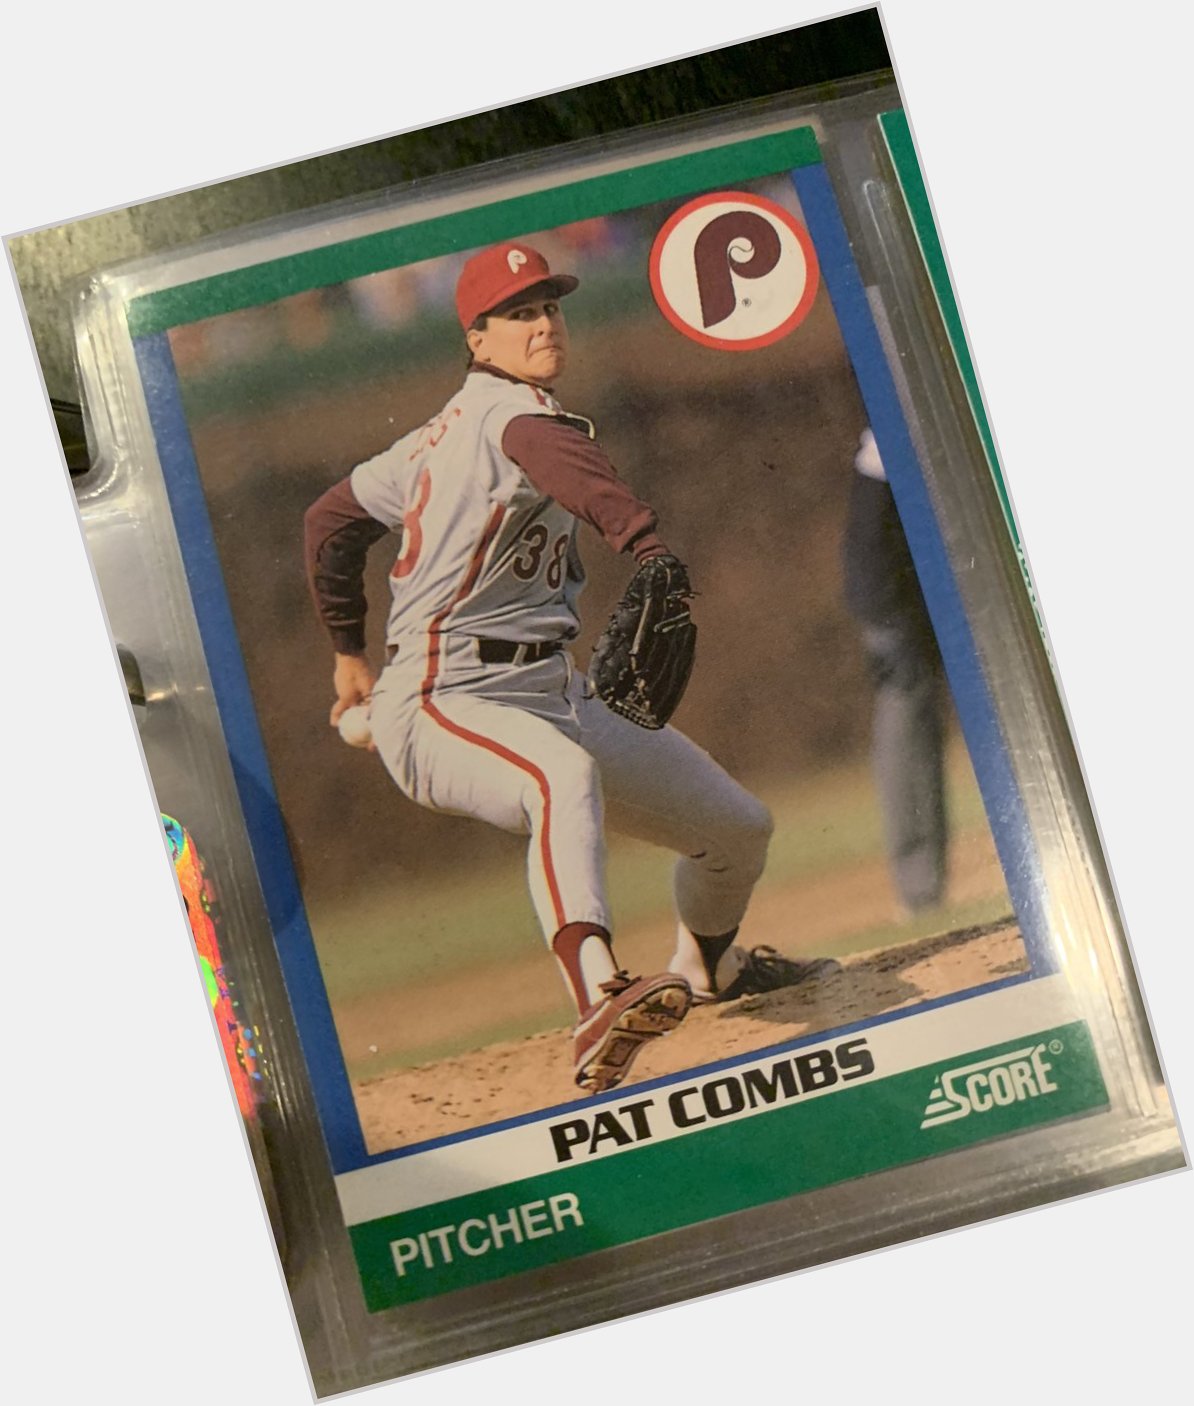 Happy Birthday to former pitcher, Pat Combs. 